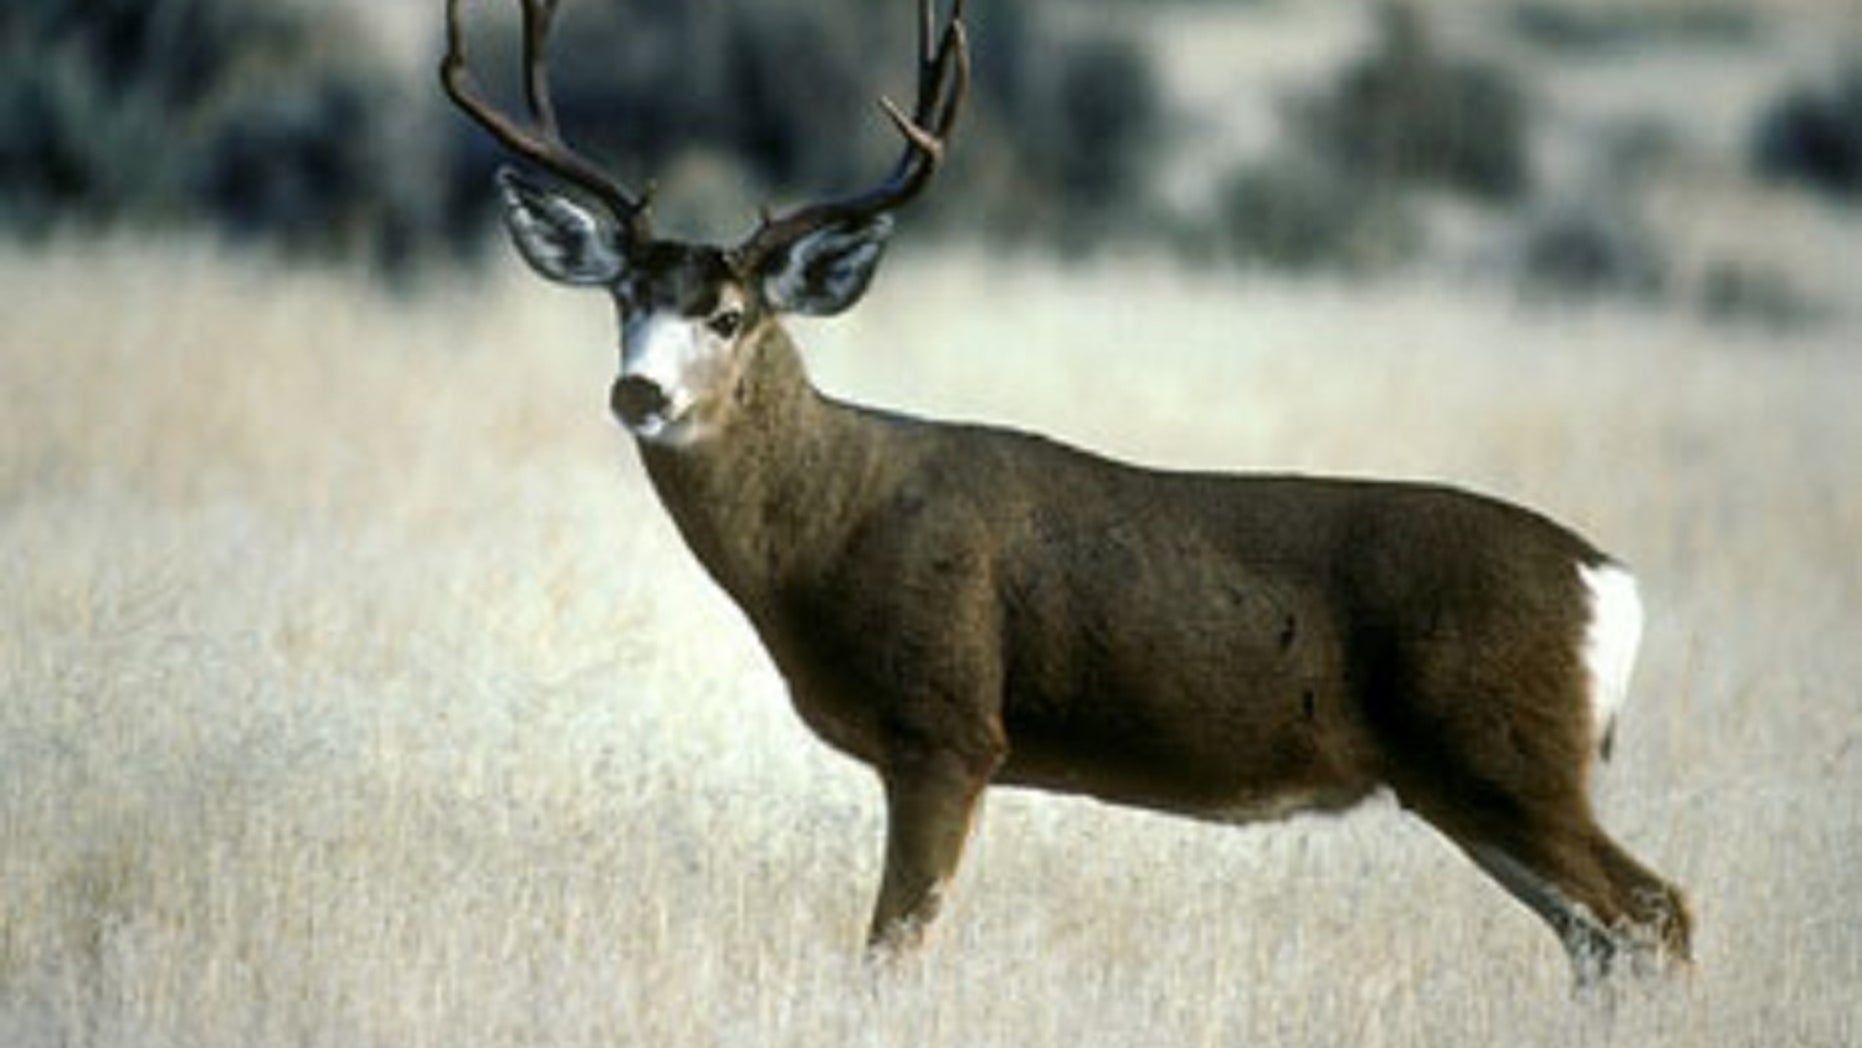 Hunter caught after illegally killing deer blames wife: report